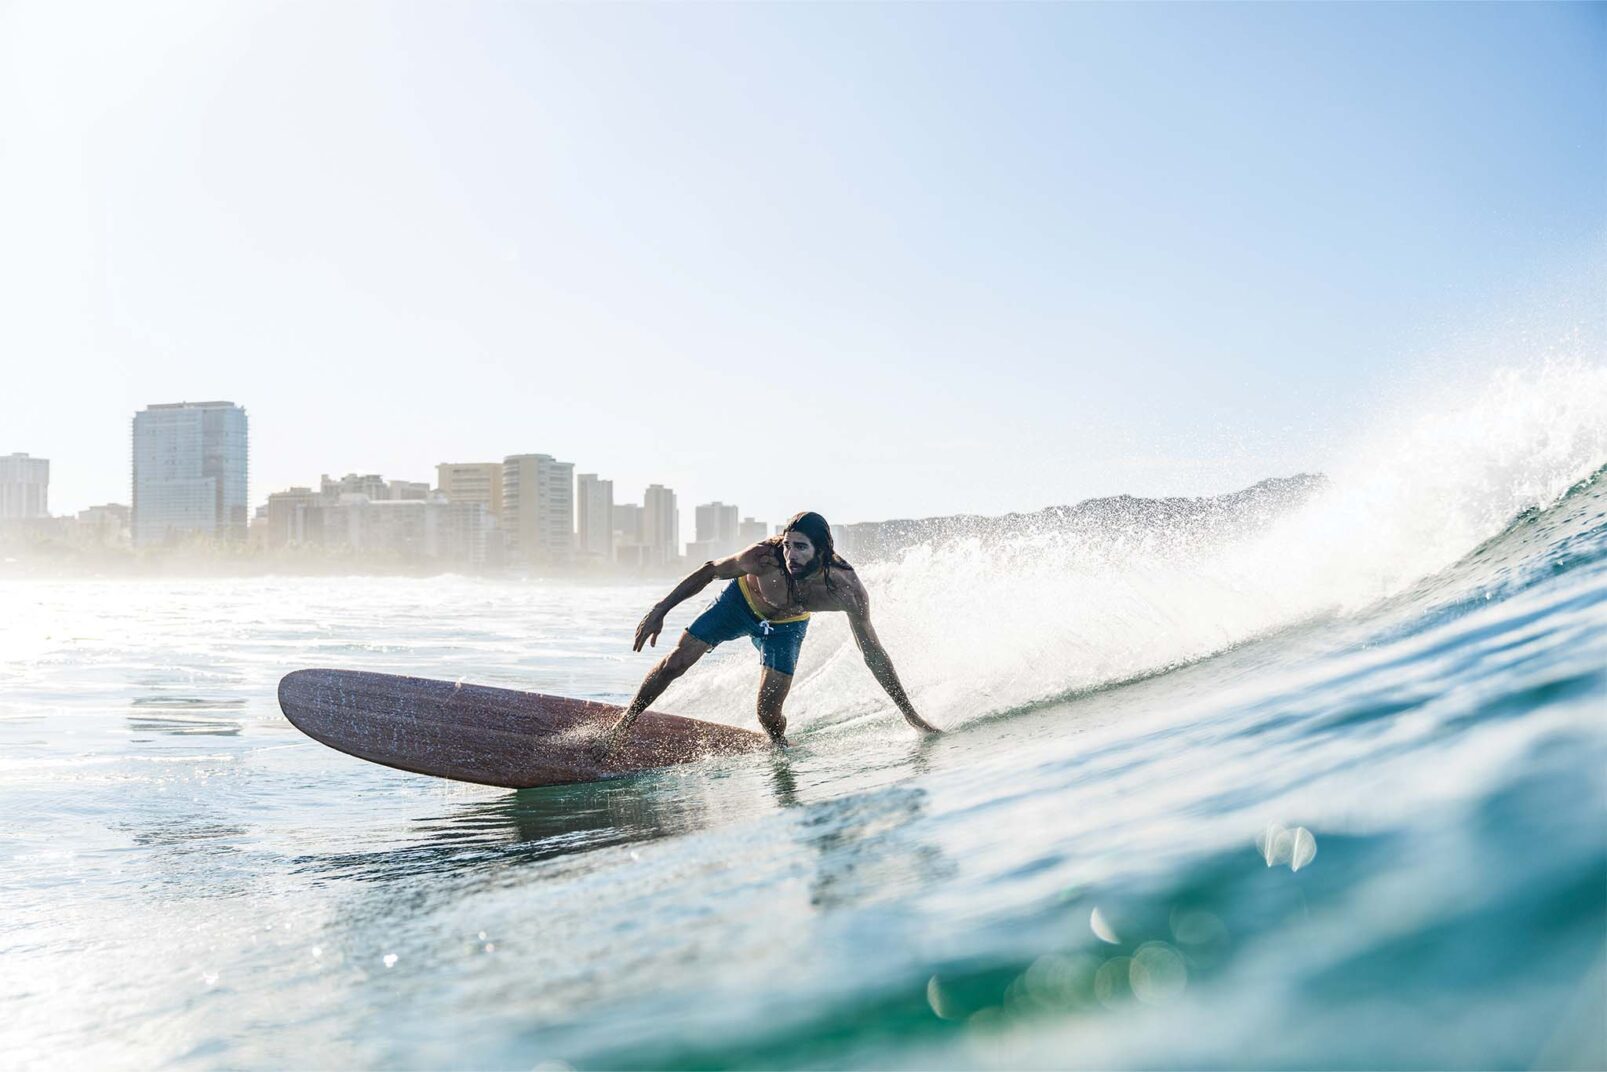 A surfer, wearing a black top and blue shorts, skillfully riding a wave on a longboard with a clear blue sky and a city skyline in the background.